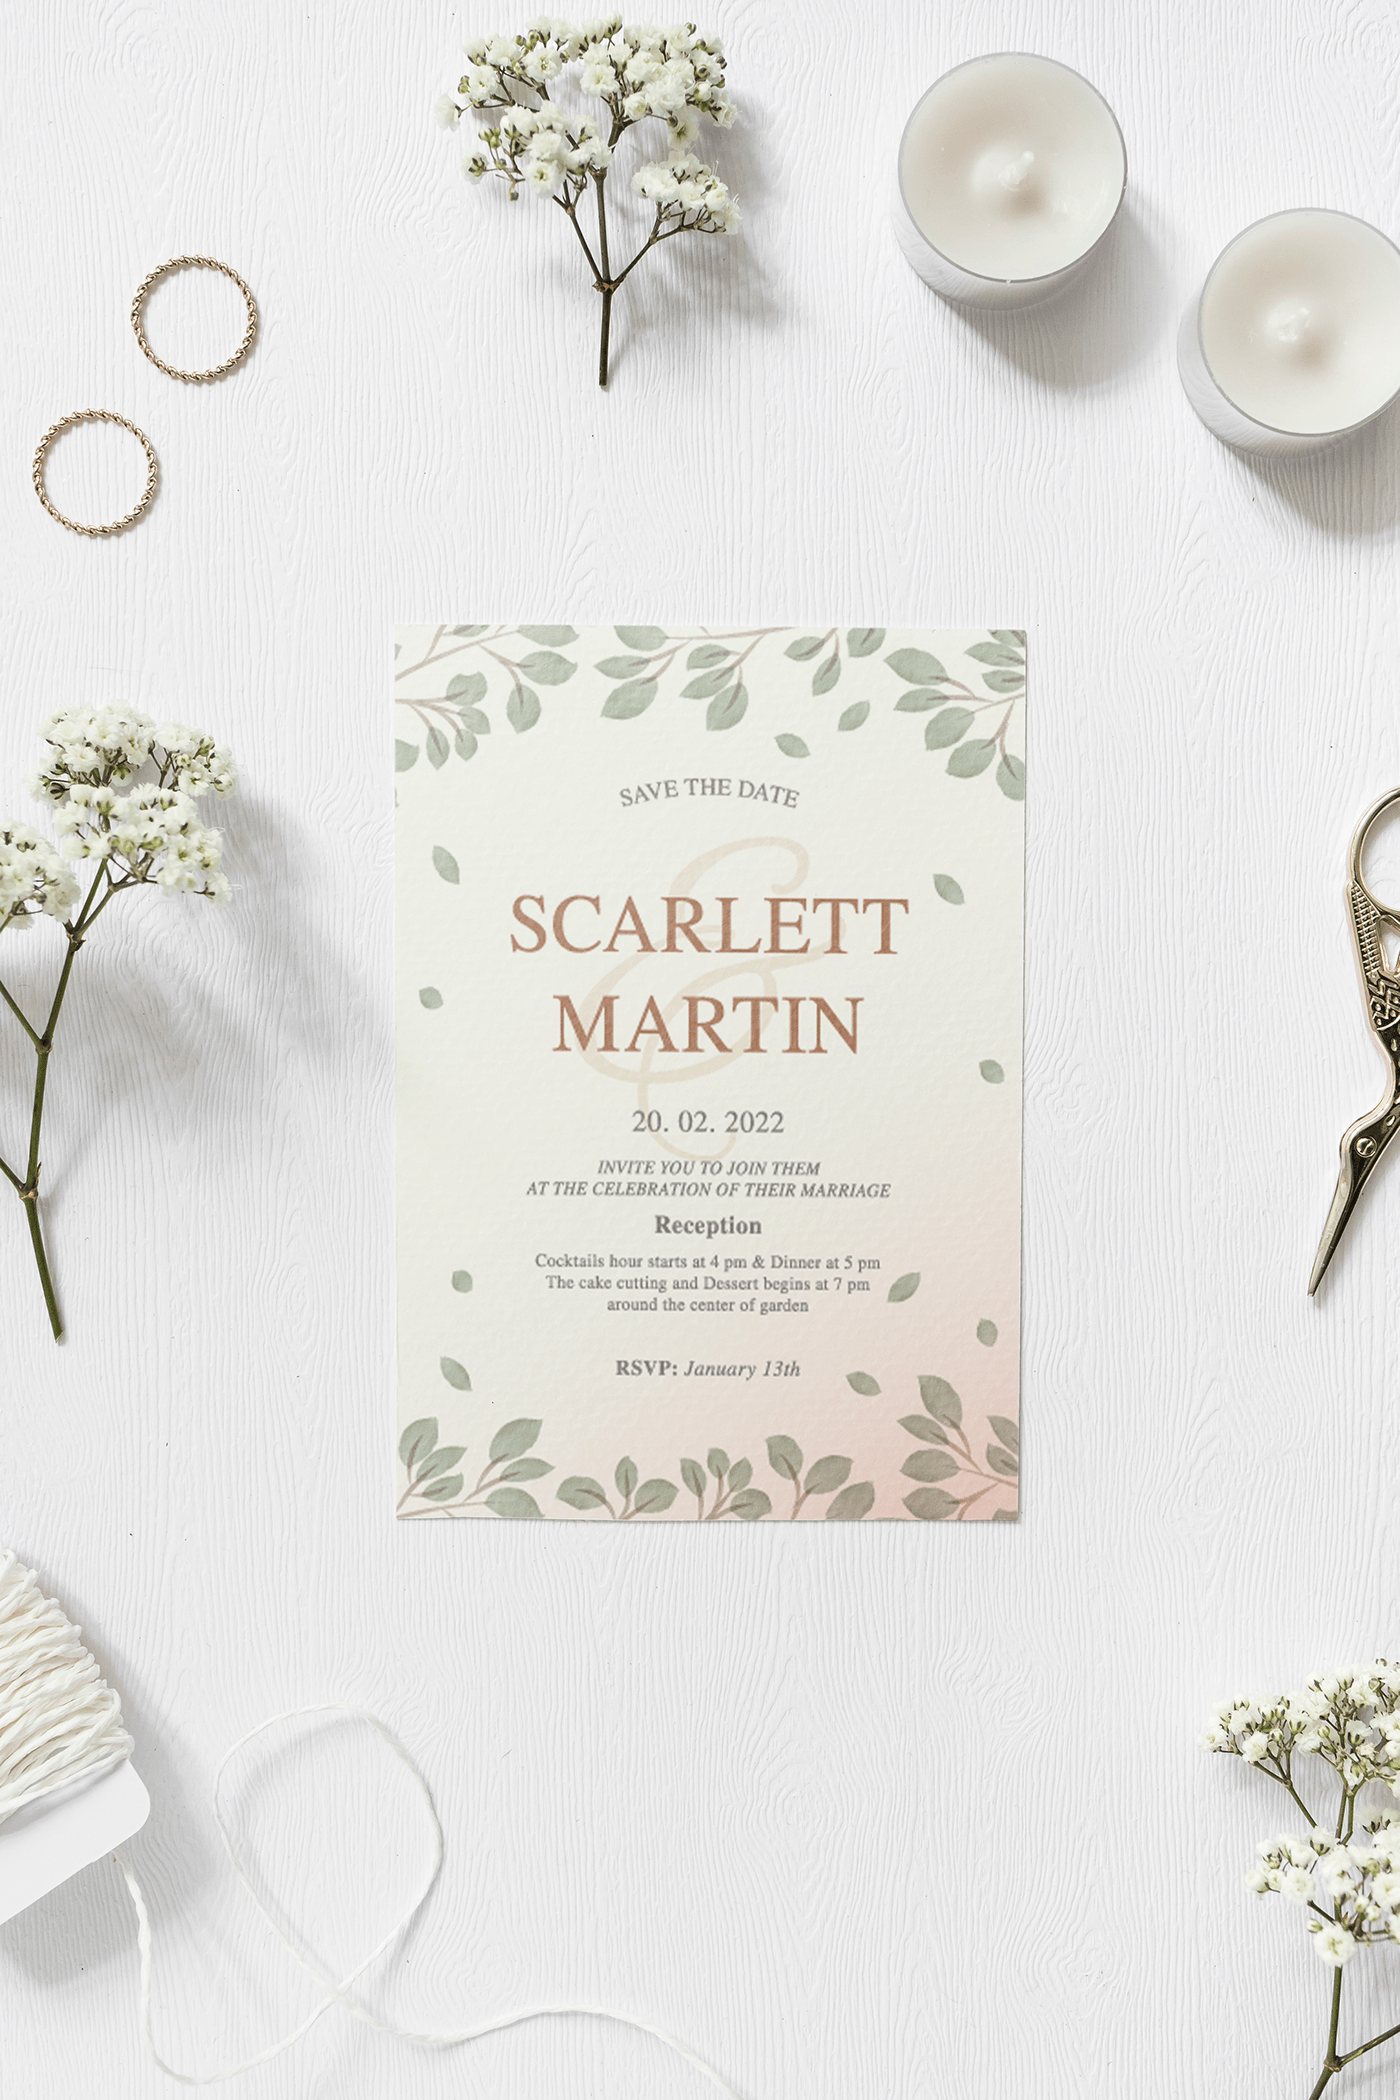 Event flower Invitation marriage rsvp save the date watercolor wedding wedding invitation rustic